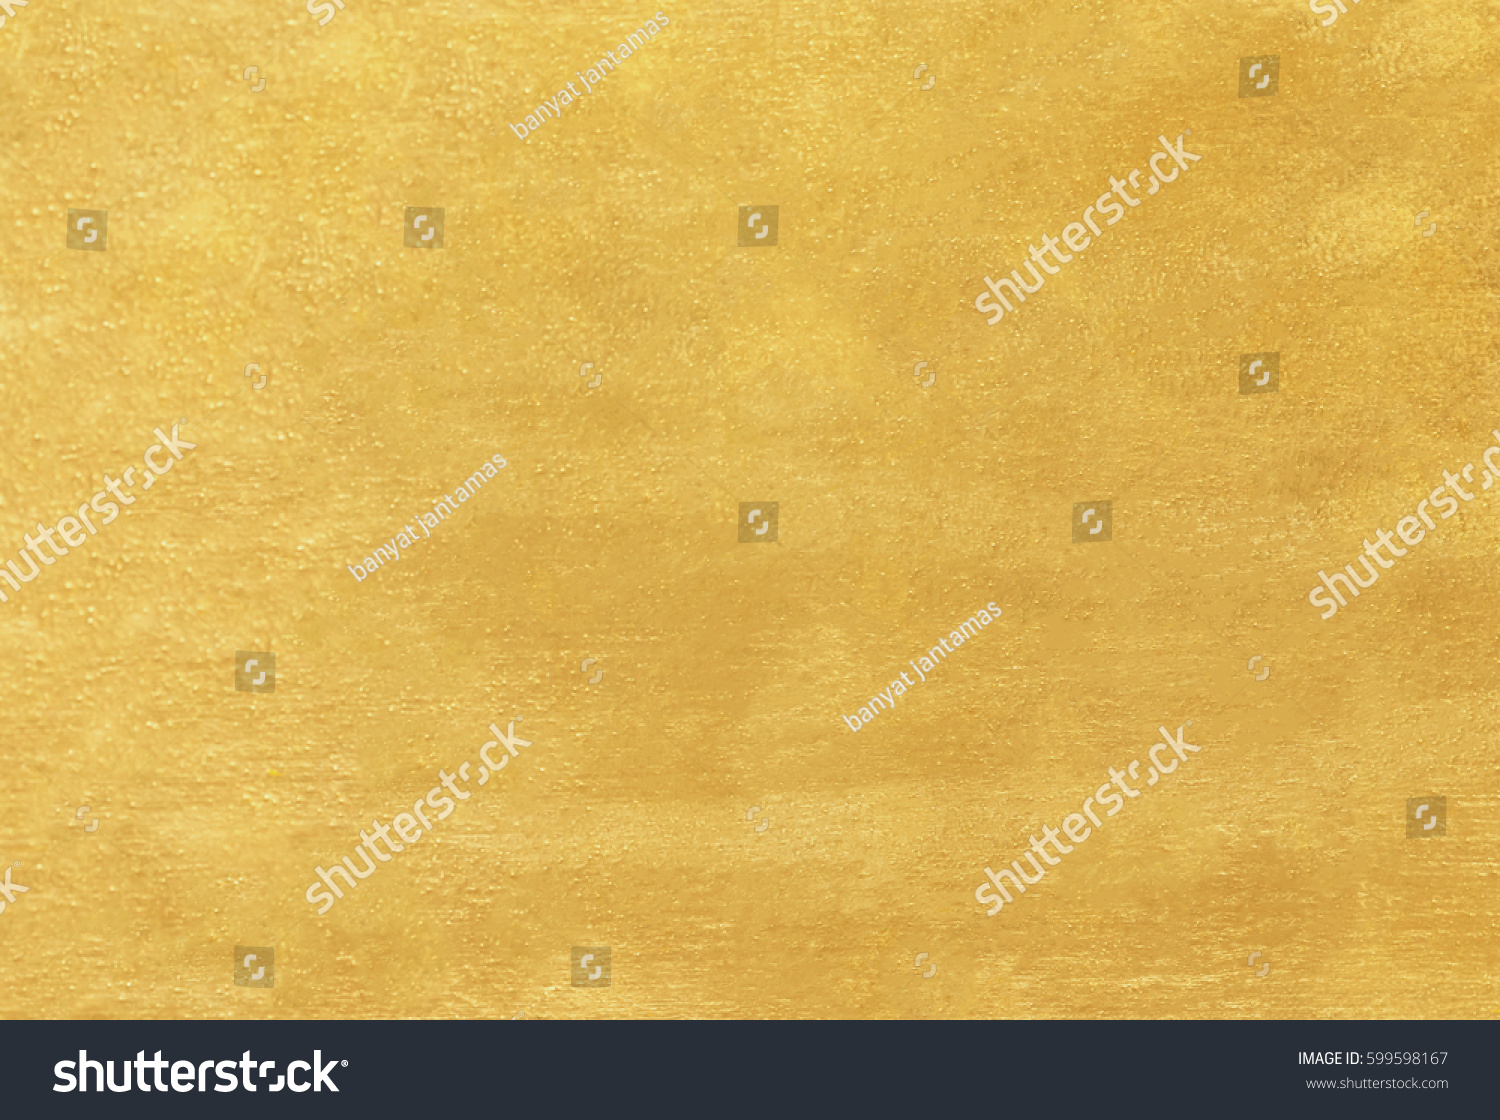 Gold background or texture and Gradients shadow. #599598167